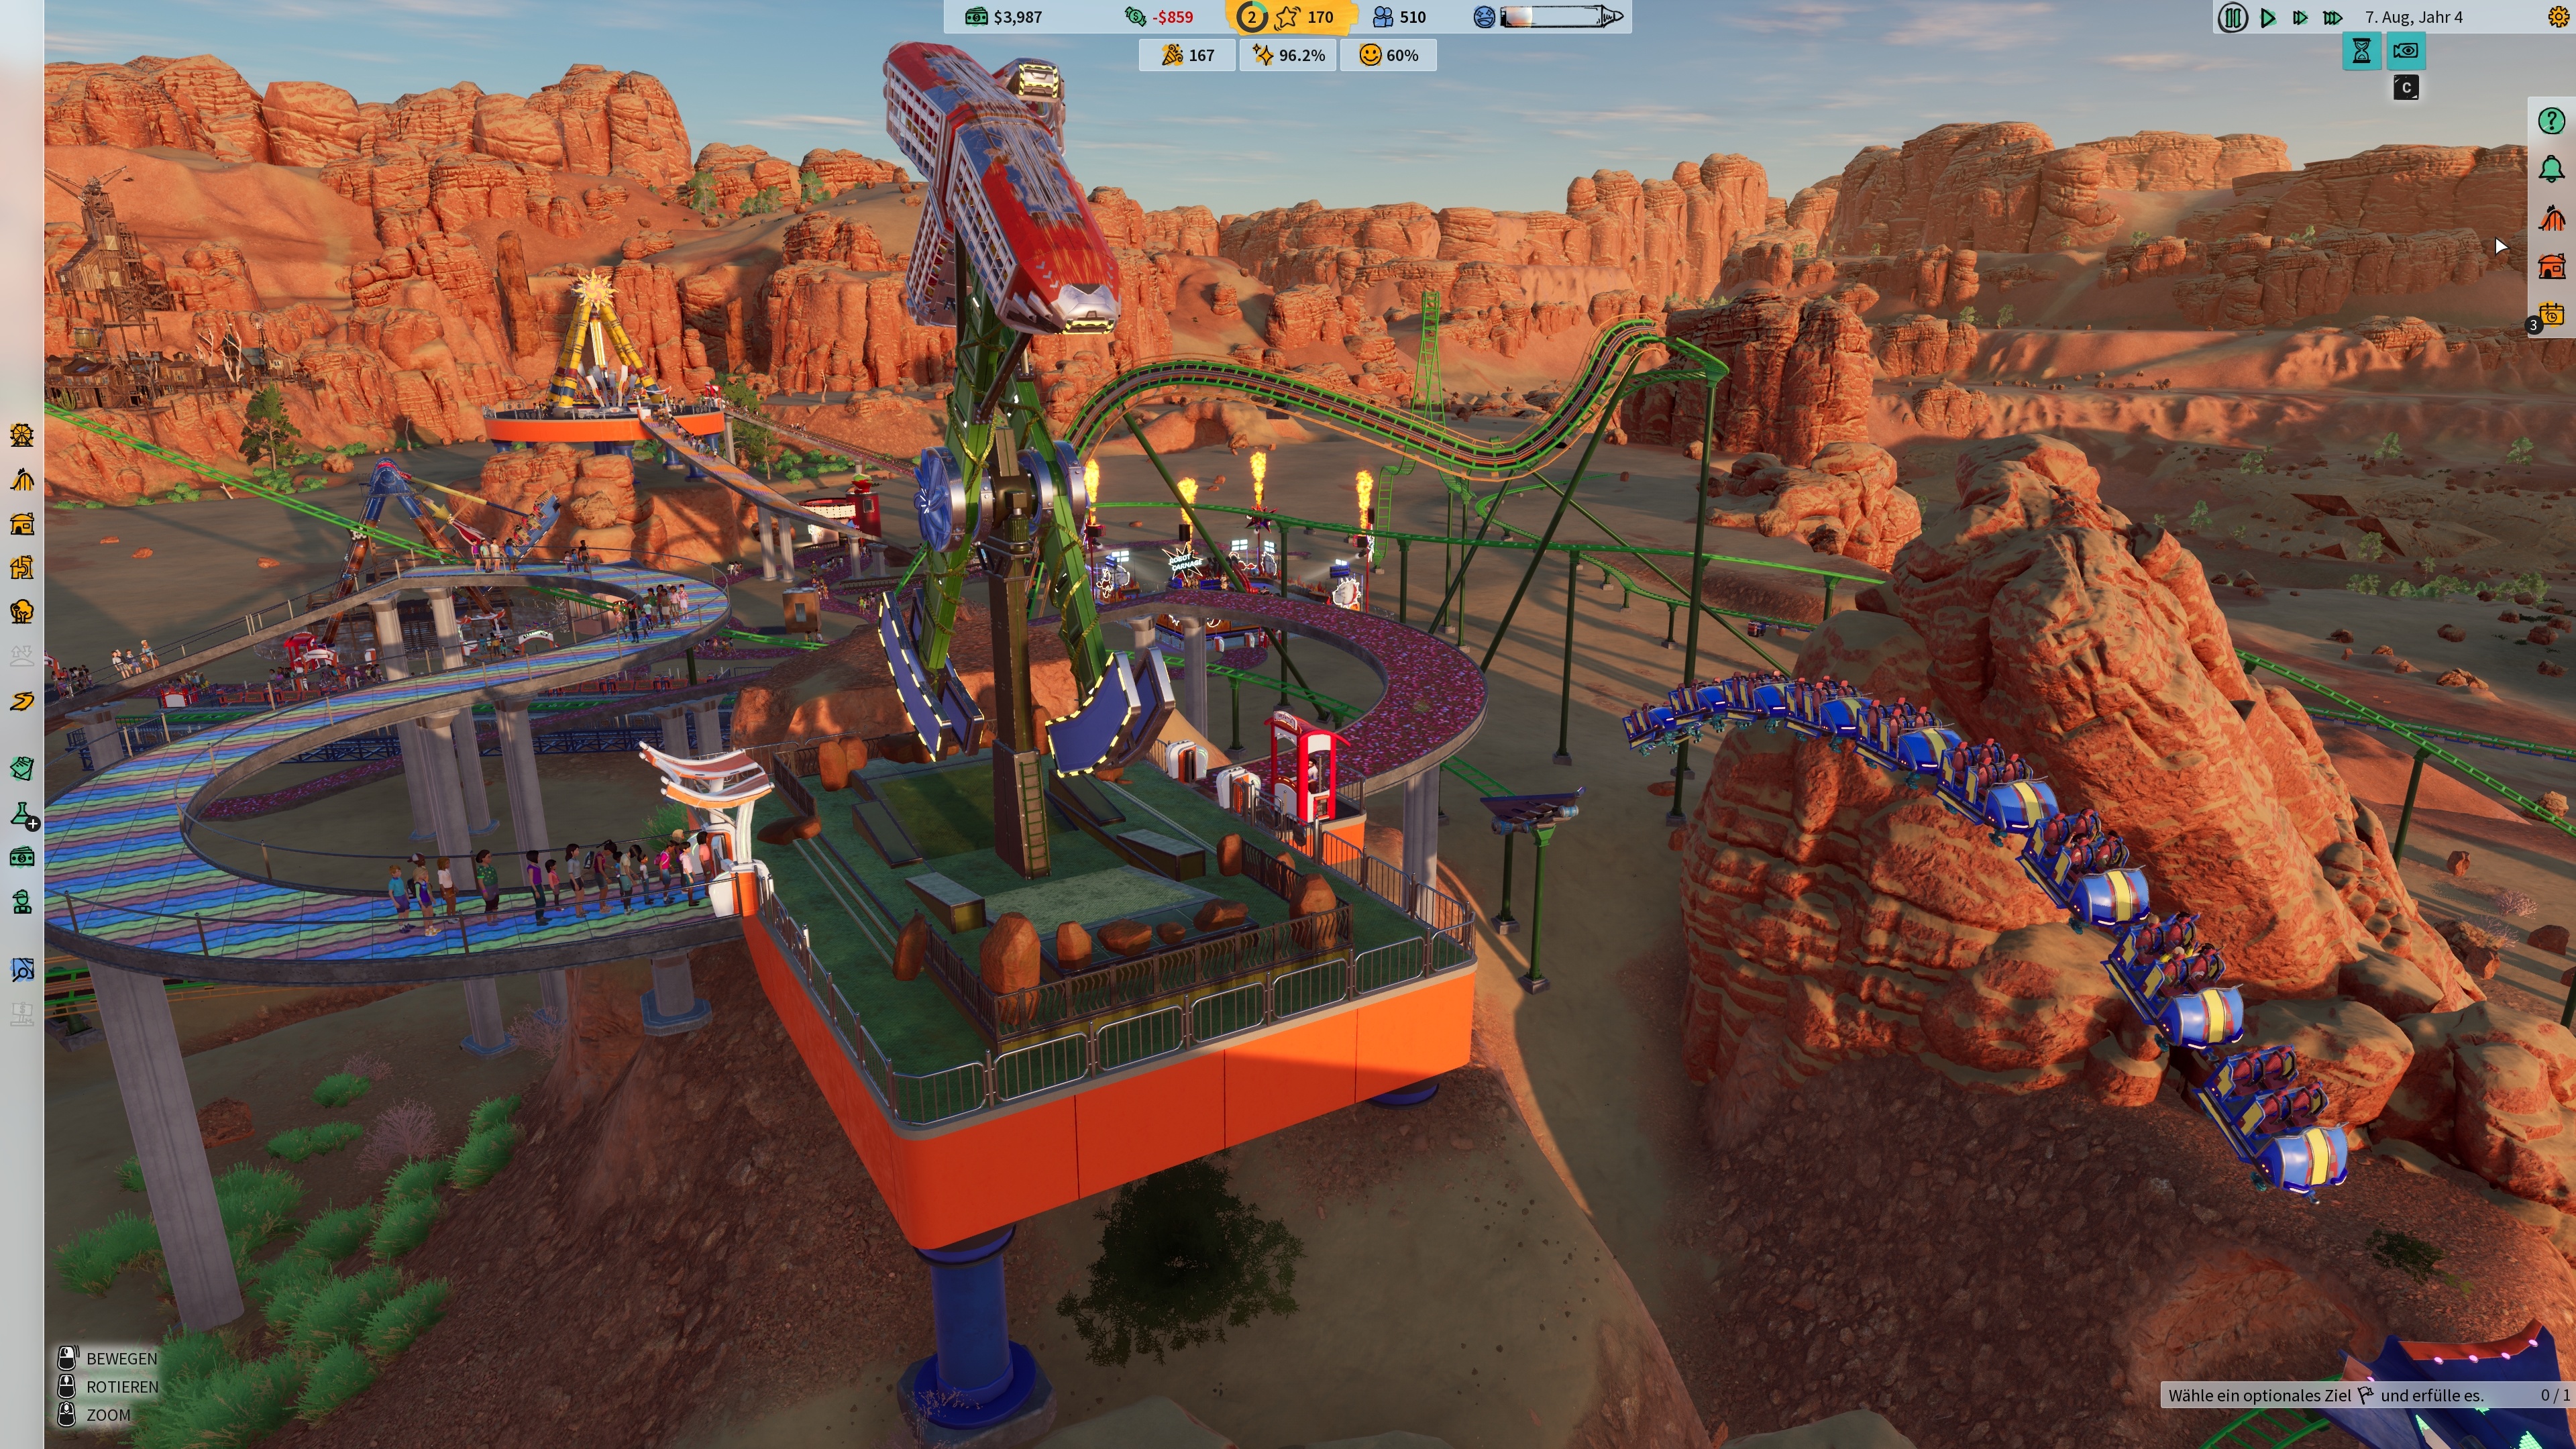 (While visitors are getting flipped upside down in the Skylander at the front of the plateau, a roller coaster train flies by on the right. Who needs tracks when there are jumps?)